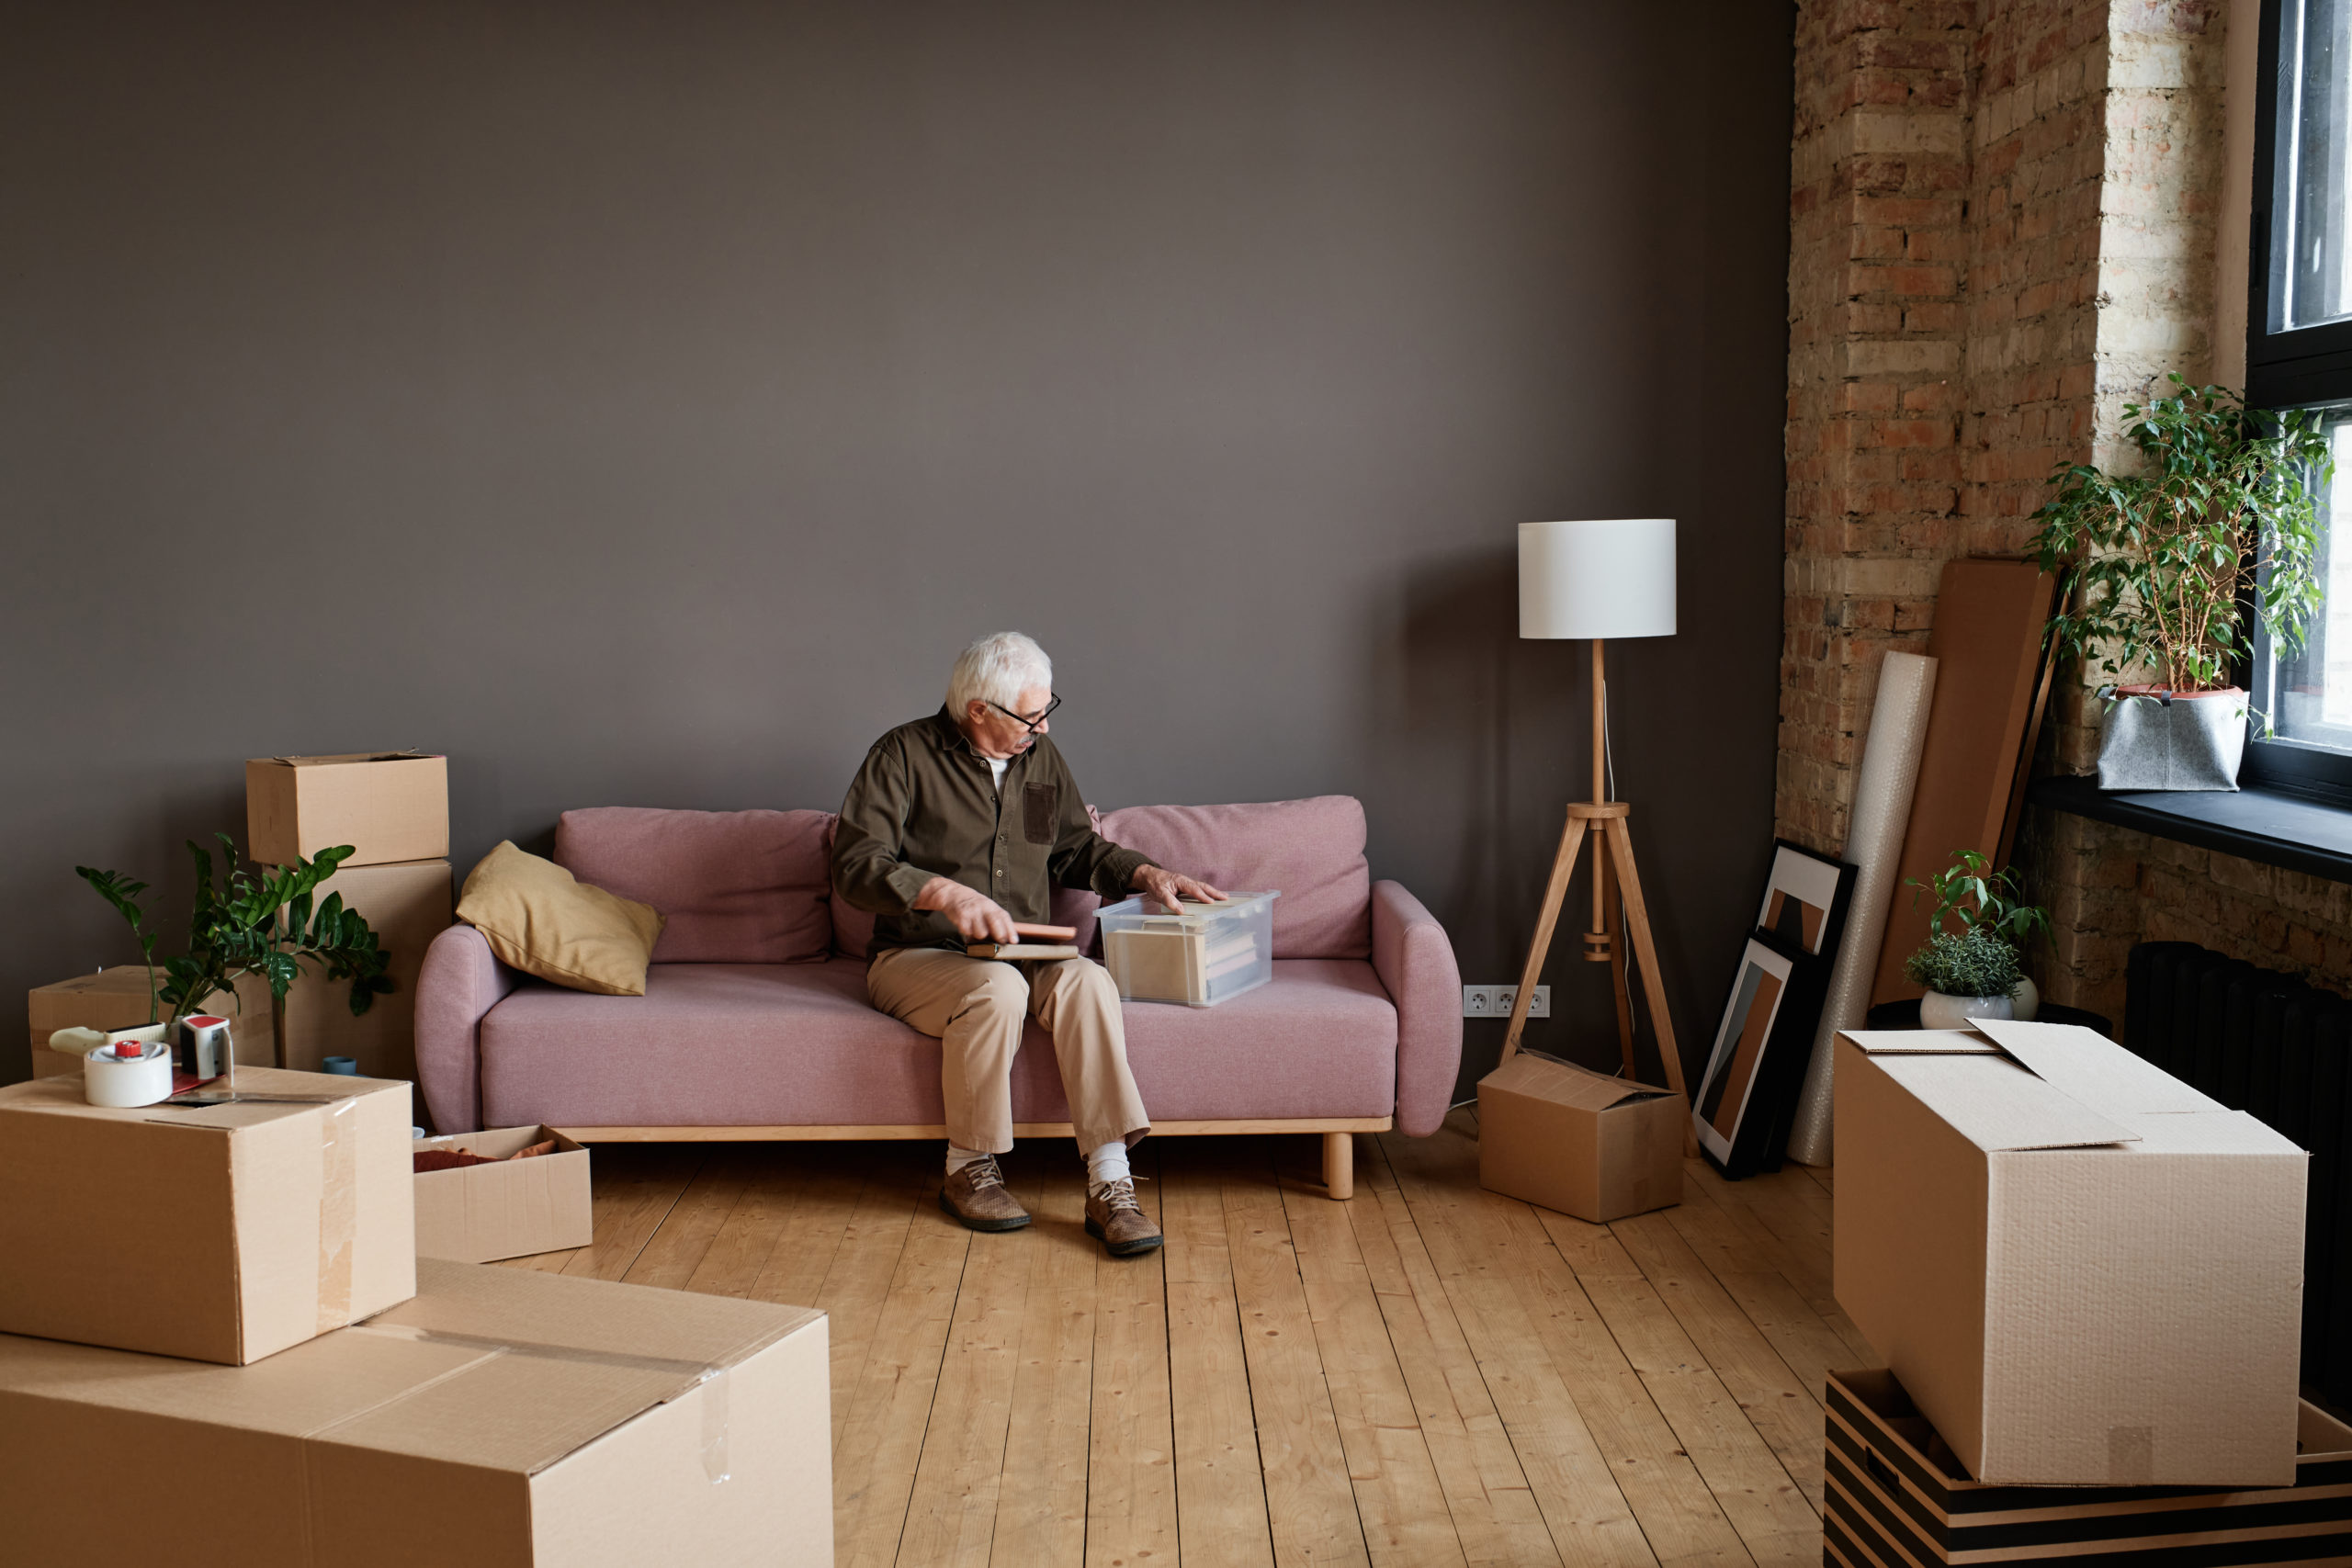 10 Essential Things to Do After Moving